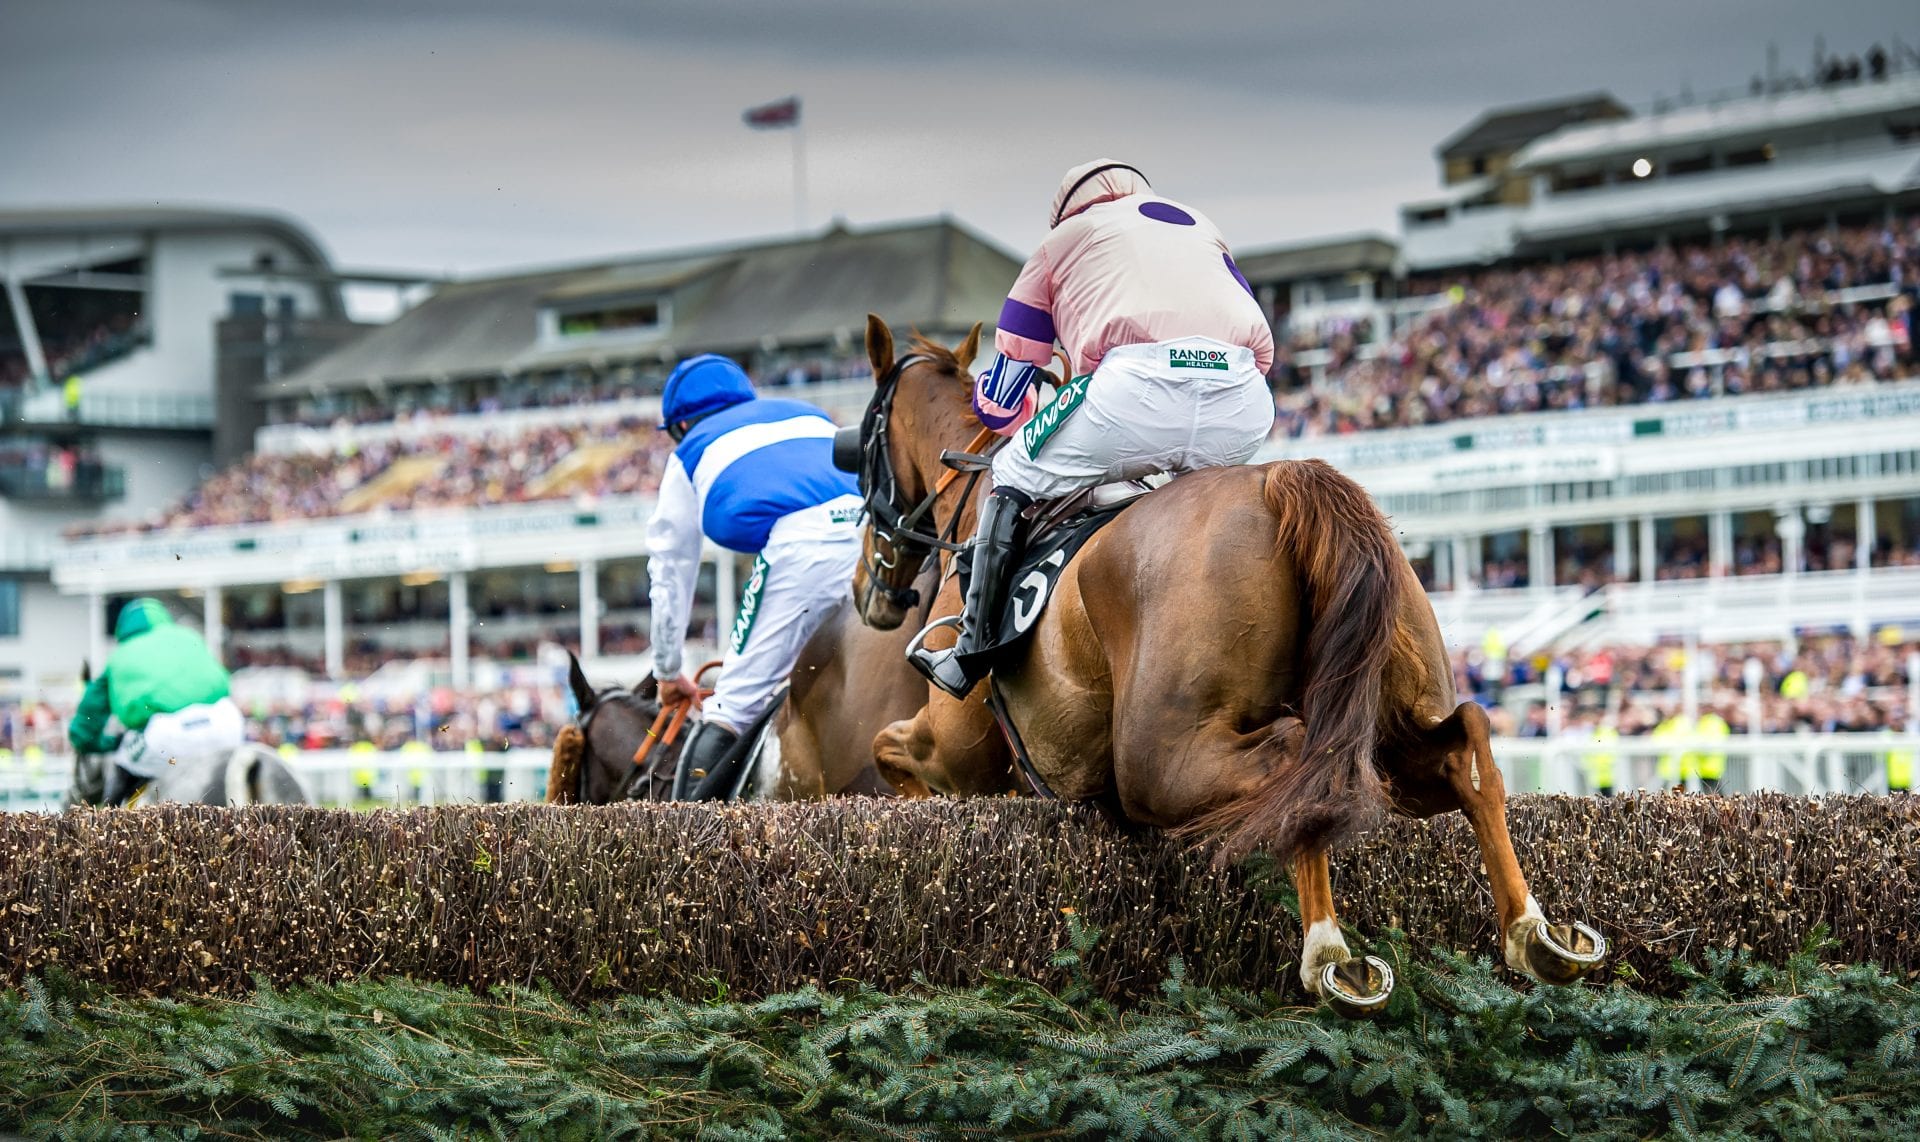 Grand National 2022 All the latest from Aintree Racecourse as gates